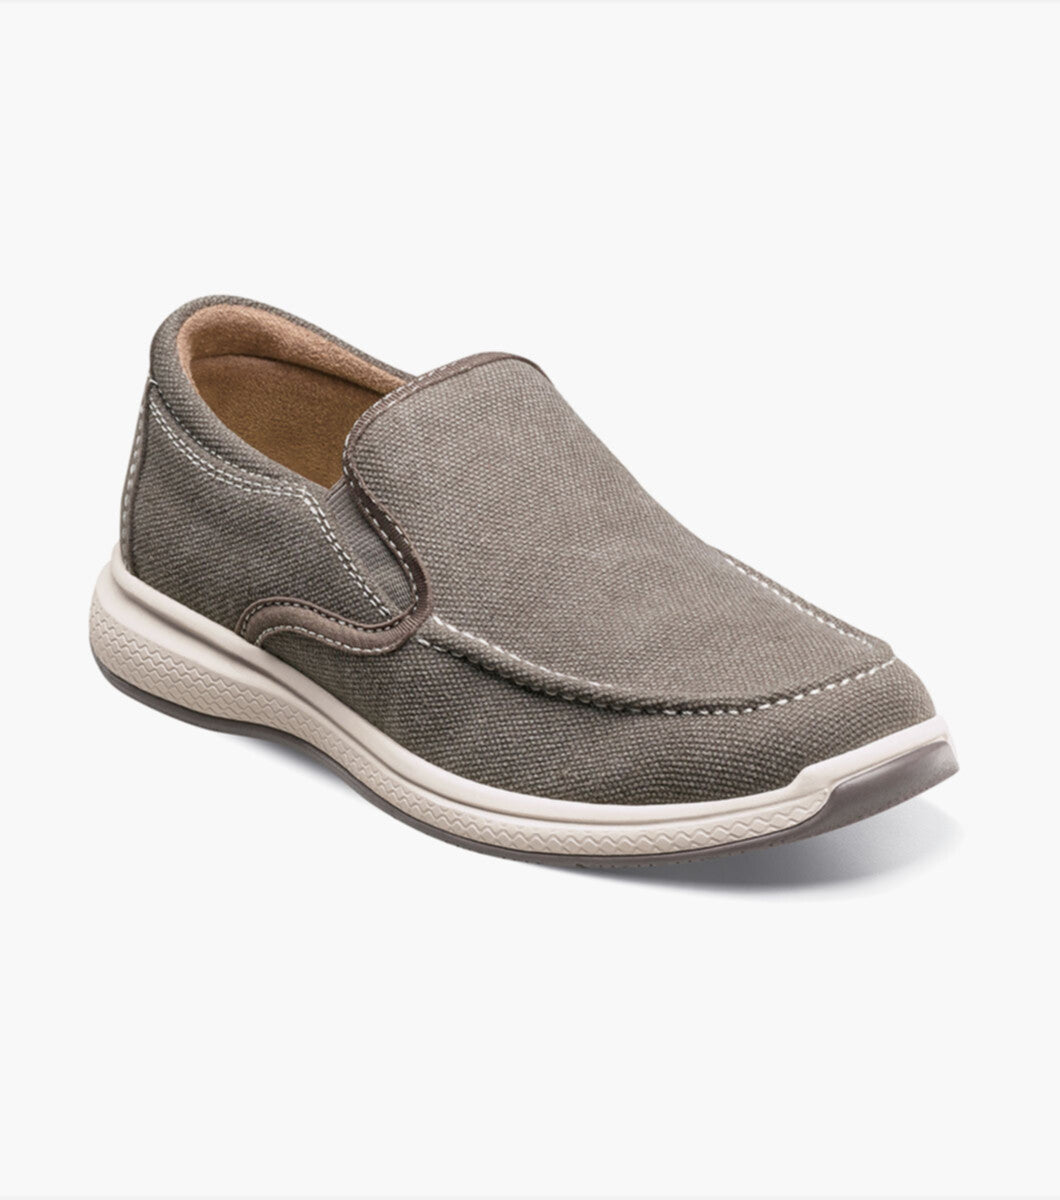 The easy-on, easy-off design and cool canvas upper of the Florsheim Venture Canvas Moc Toe Venetian Loafer, Jr. make it the perfect warm weather shoe. The versatile design is complemented by the comfort of a fully cushioned footbed and our ultra-comfortable Supacush midsole.